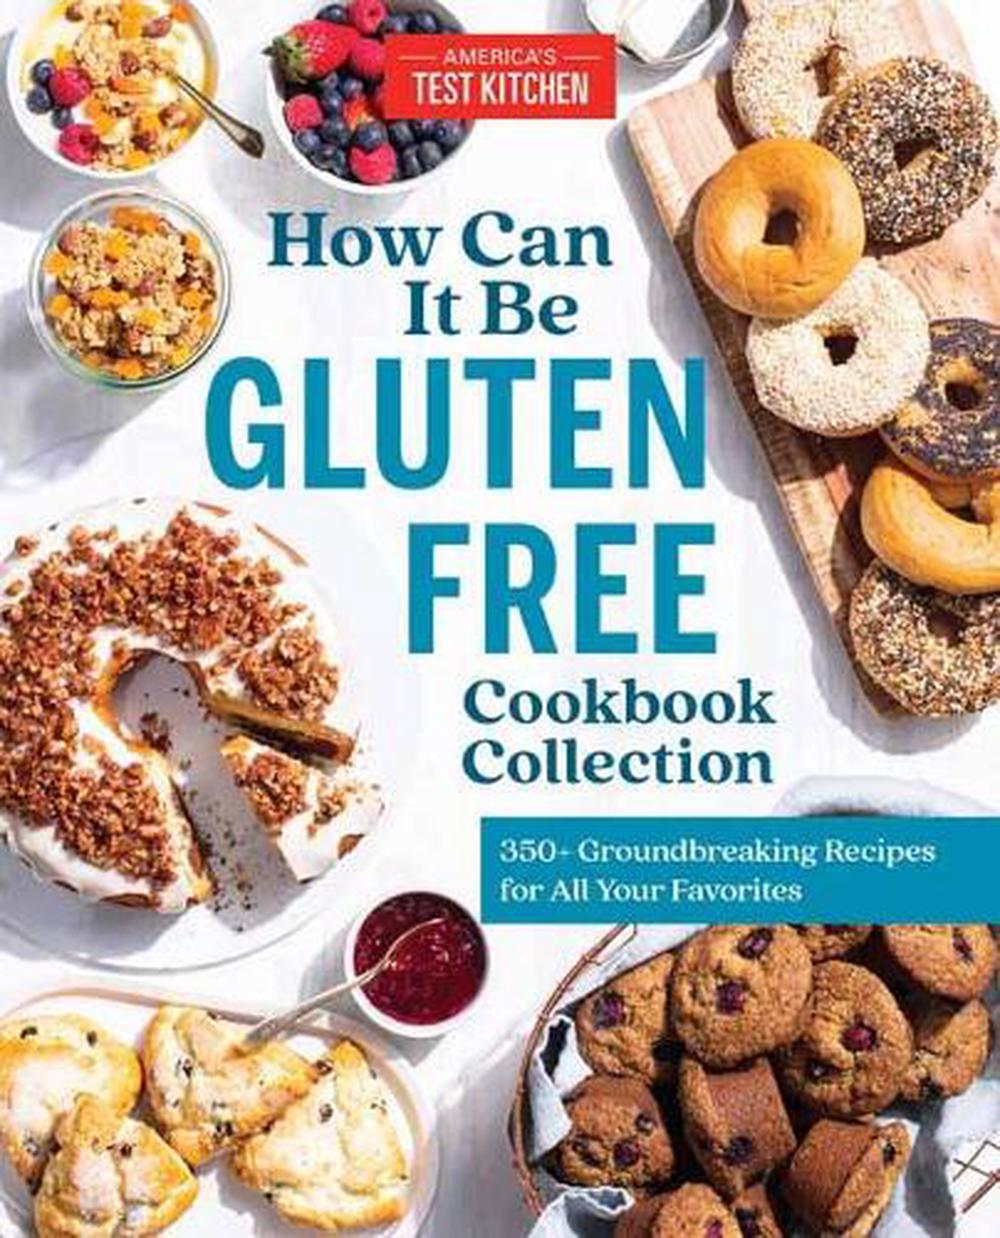 The How Can It Be Gluten Free Cookbook Collection: 350+ Groundbreaking ...